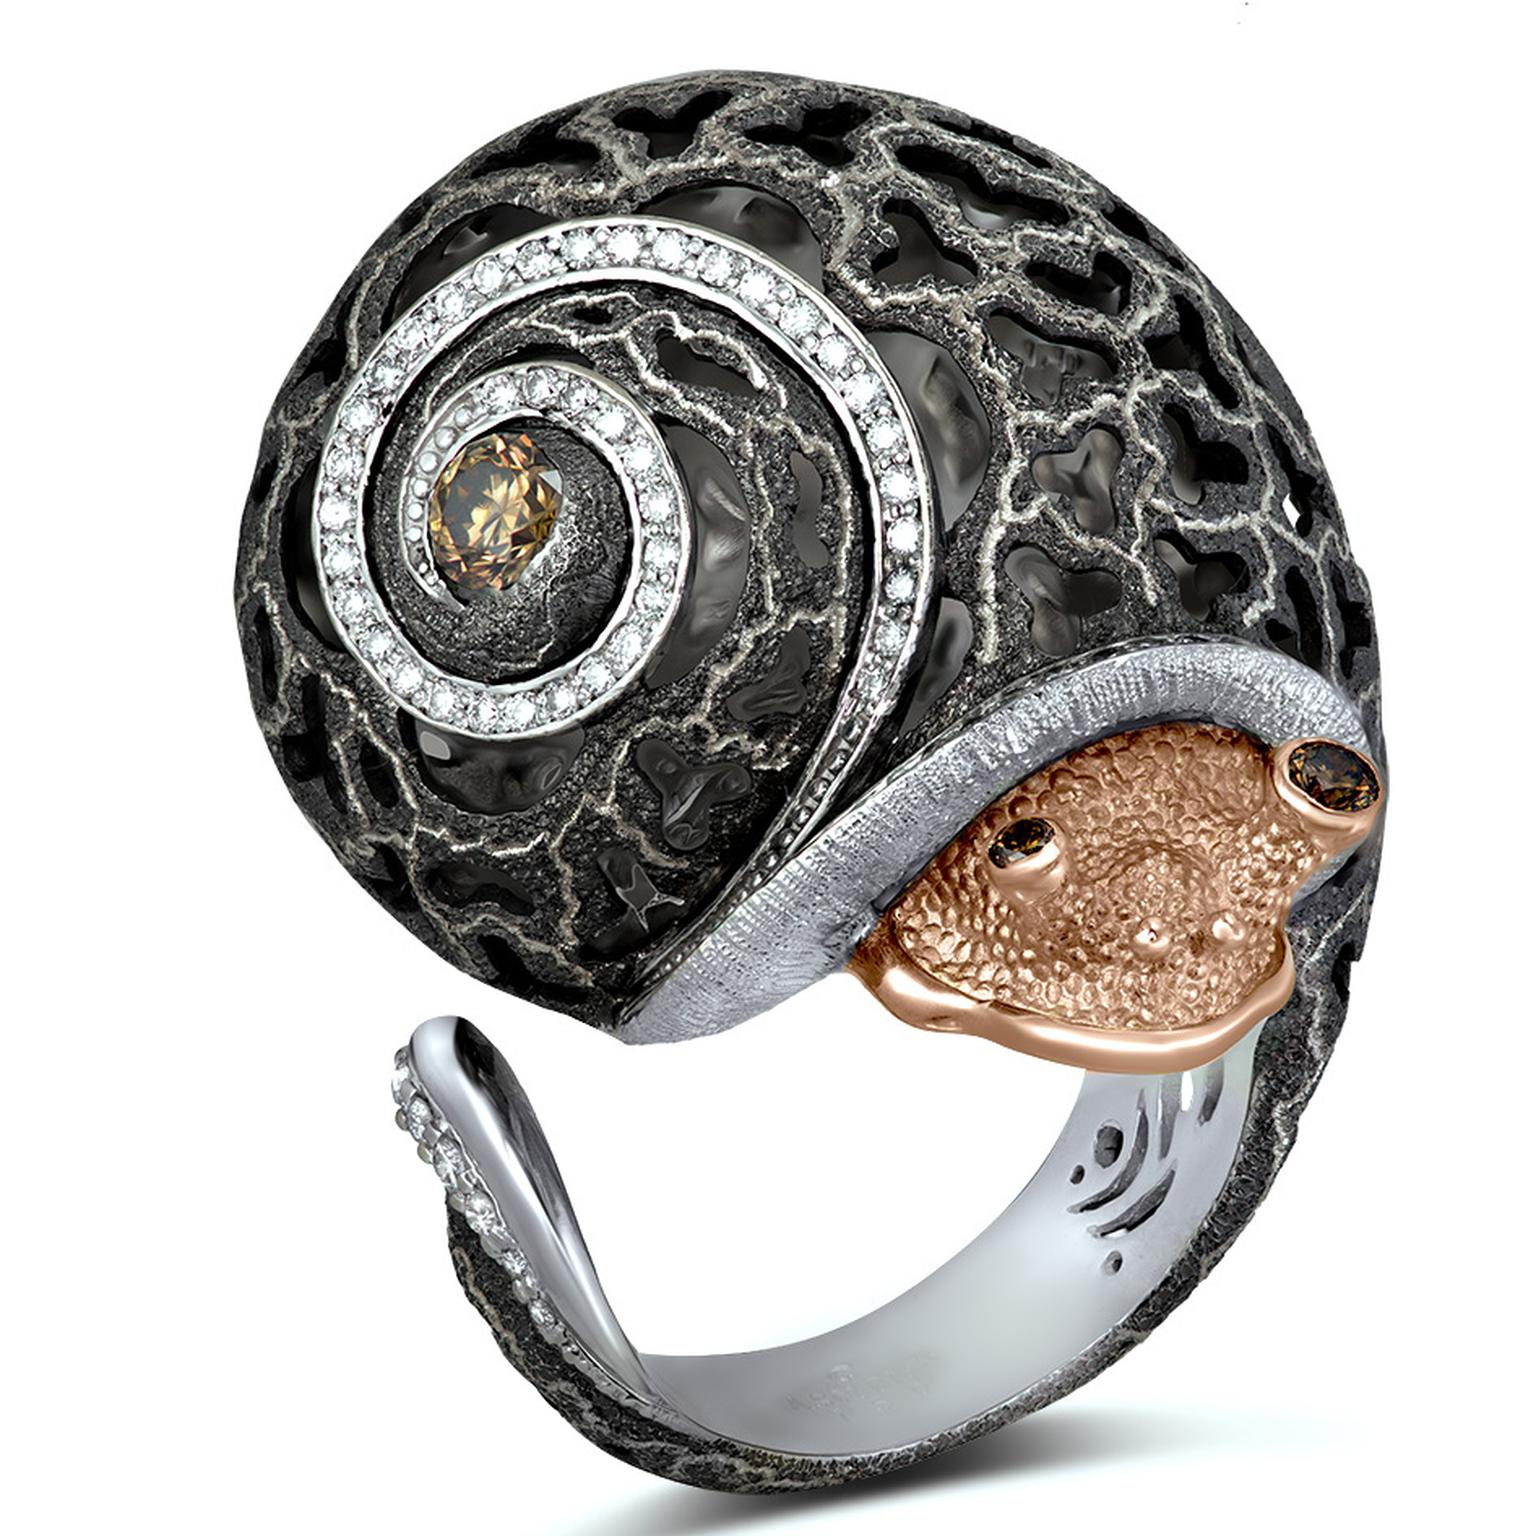 Codi The Snail Ring from Alex Soldier